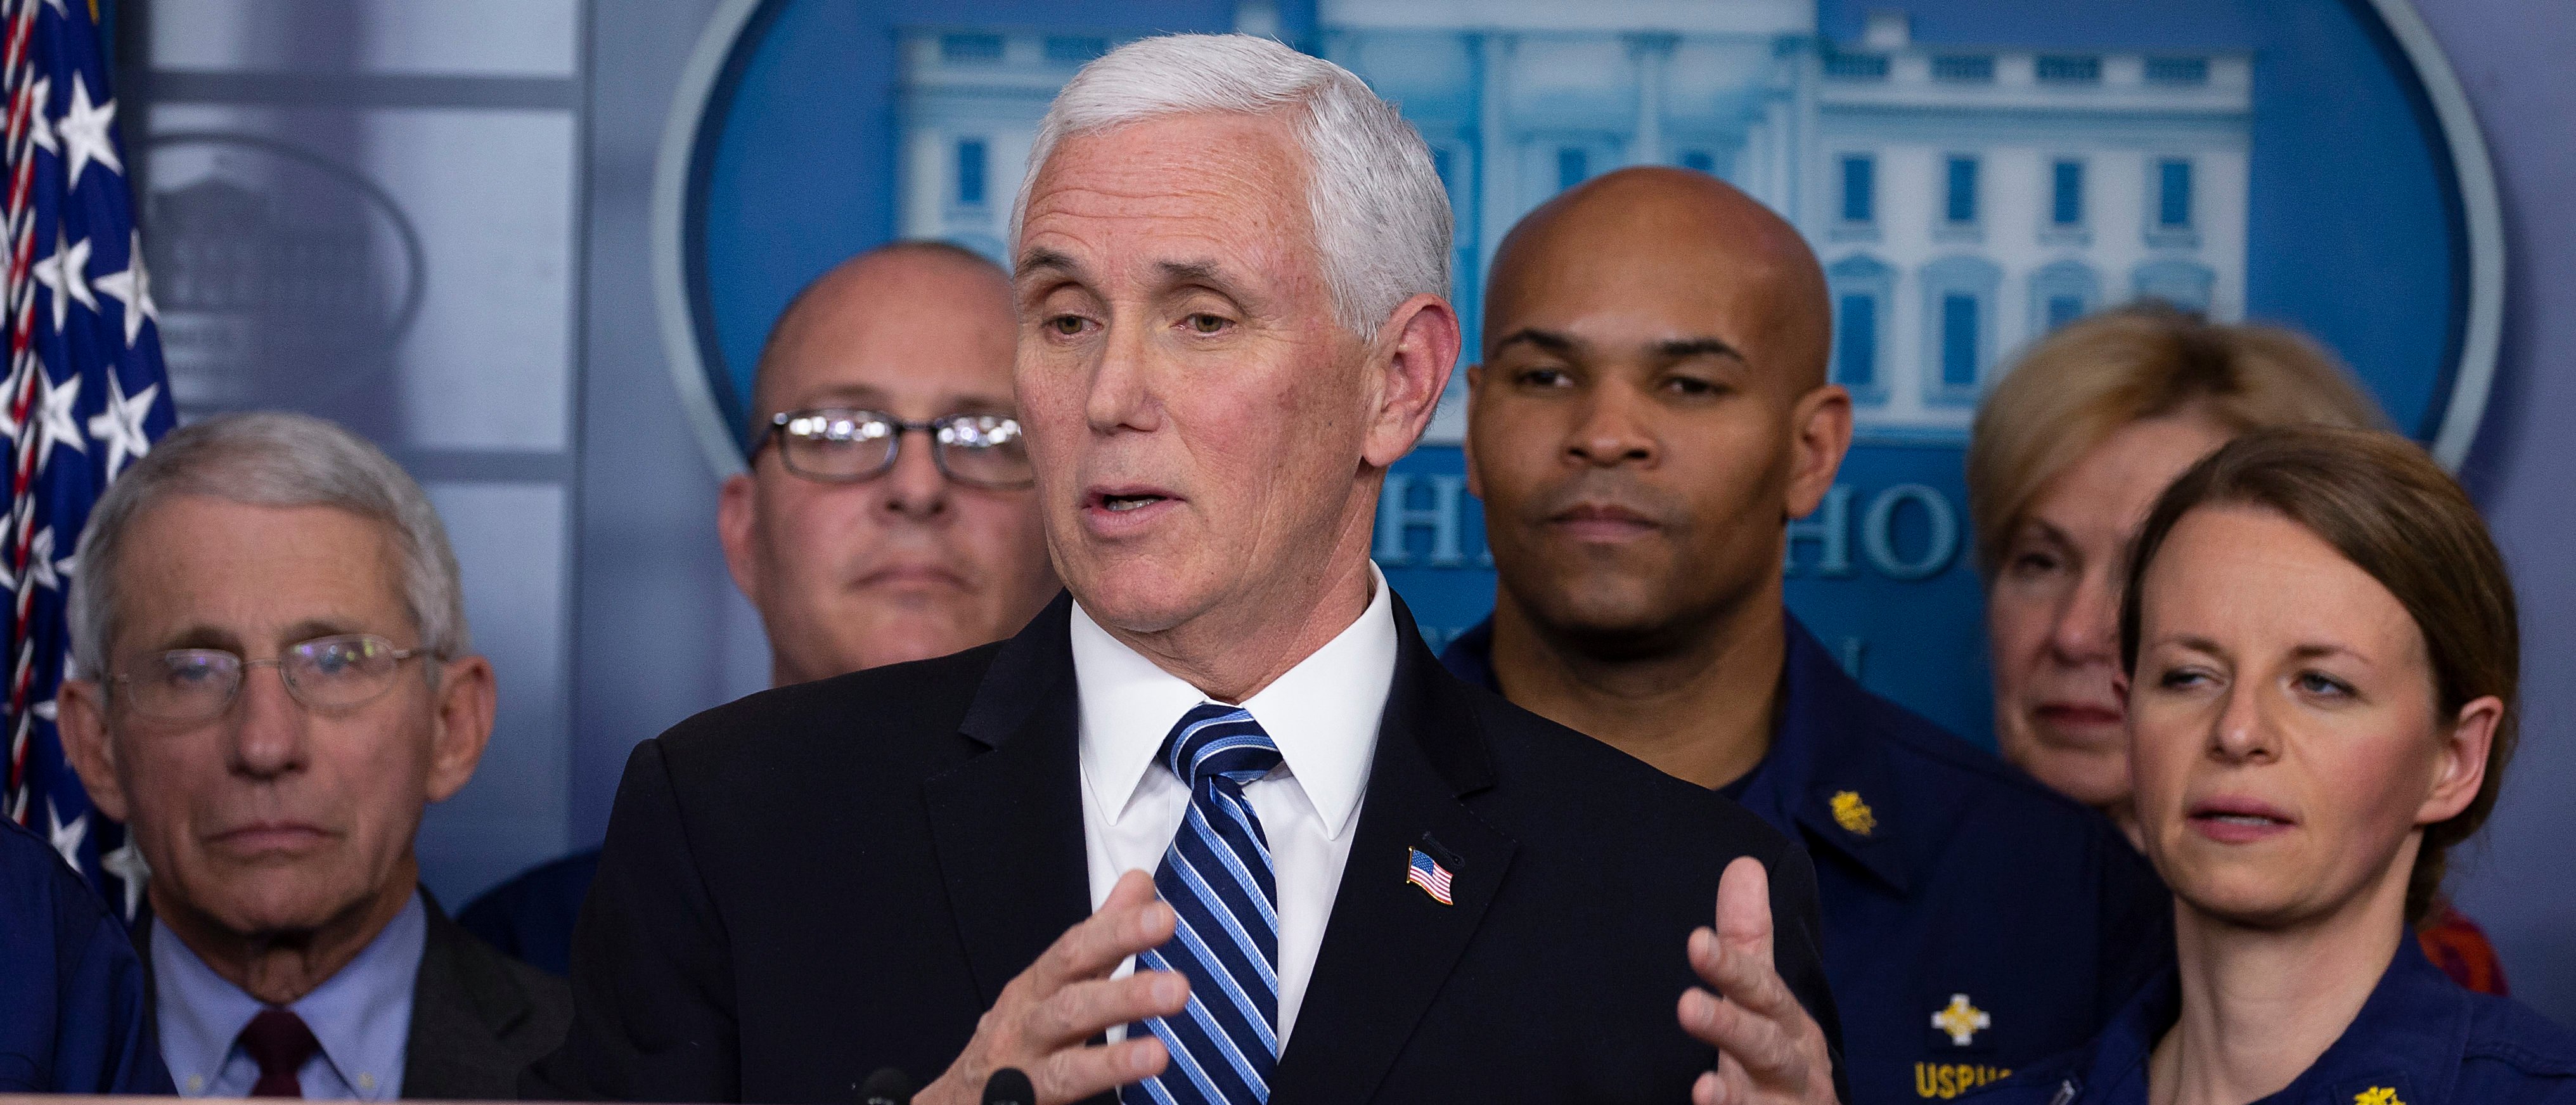 WASHINGTON, DC - MARCH 15: Vice President Mike Pence speaks to the media in the press briefing room at the White House on March 15, 2020 in Washington, DC. The United States has surpassed 3,000 confirmed cases of the coronavirus, and the death toll climbed to at least 61, with 25 of the deaths associated with the Life Care Center in Kirkland, Washington. (Photo by Tasos Katopodis/Getty Images)